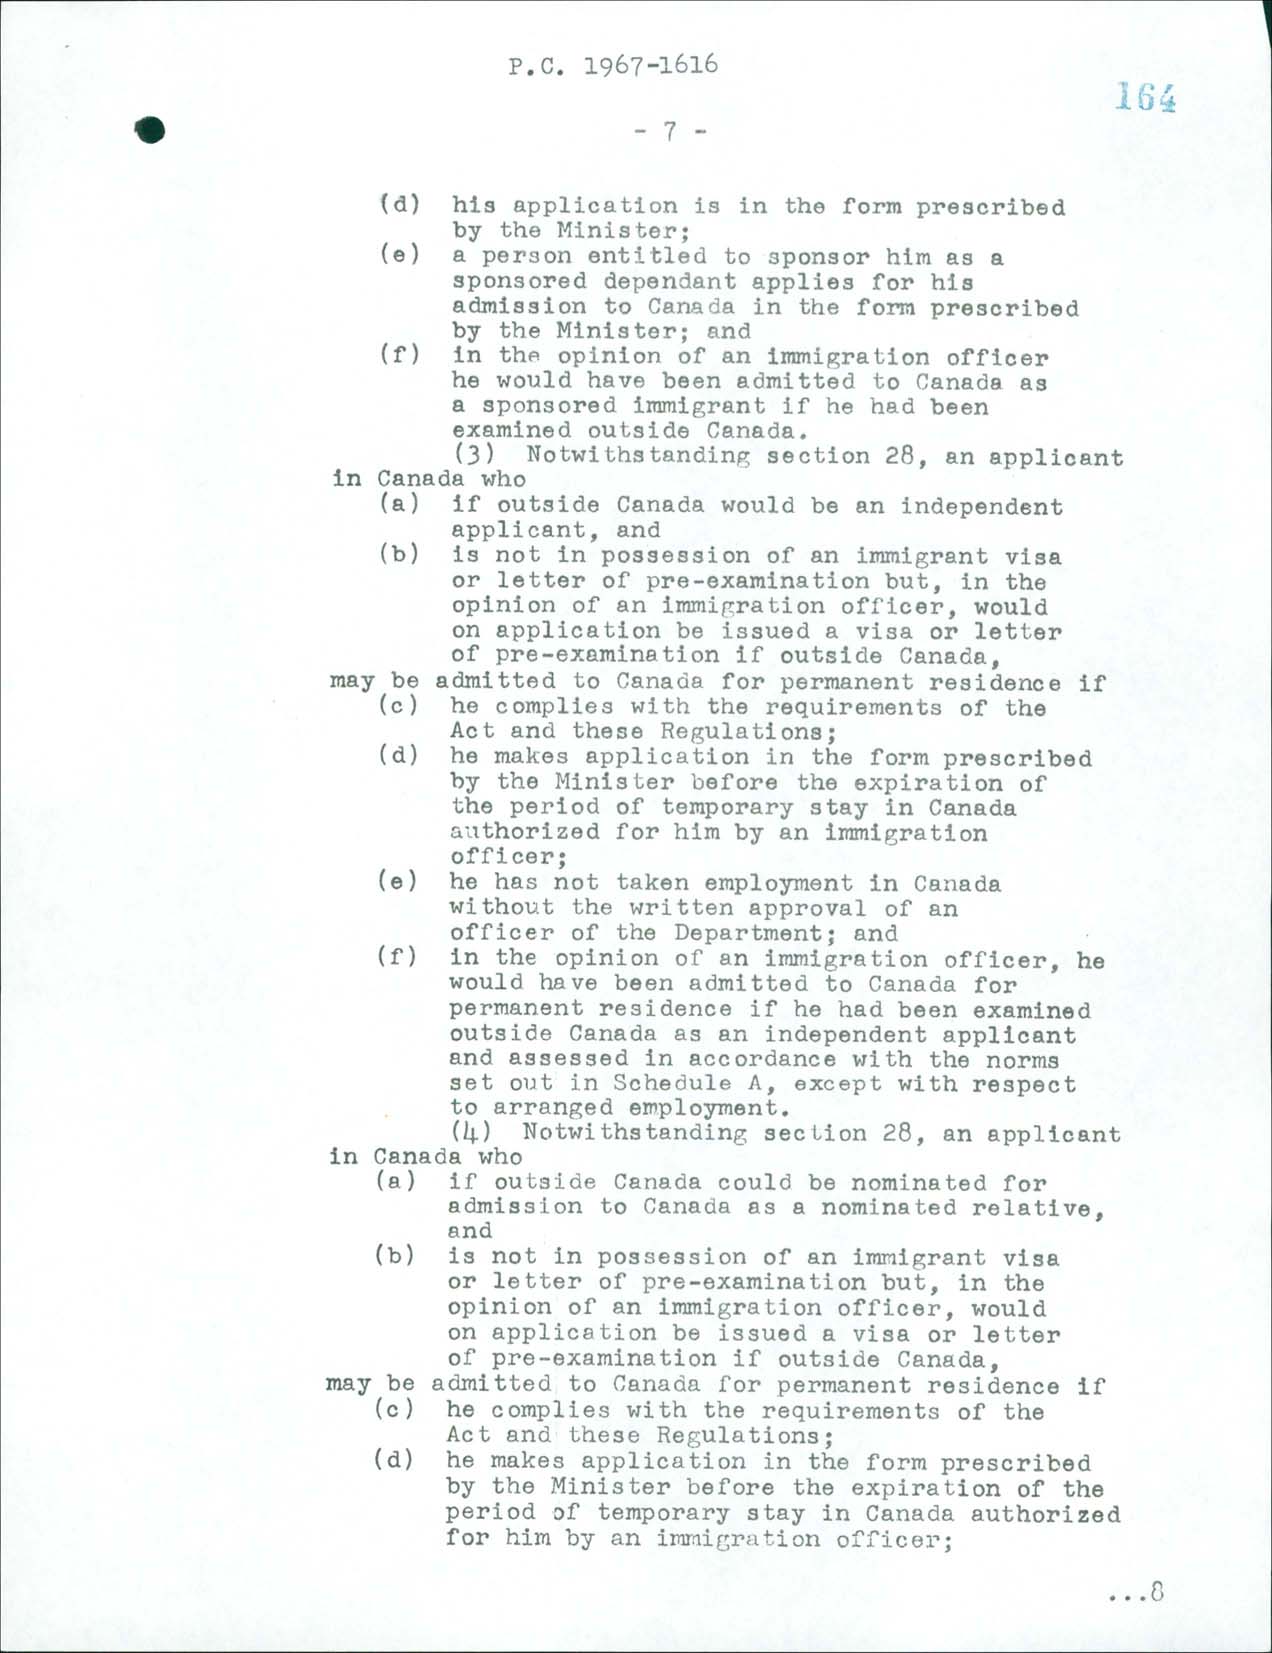 Page 7 Immigration Regulations, Order-in Council PC 1967-1616, 1967